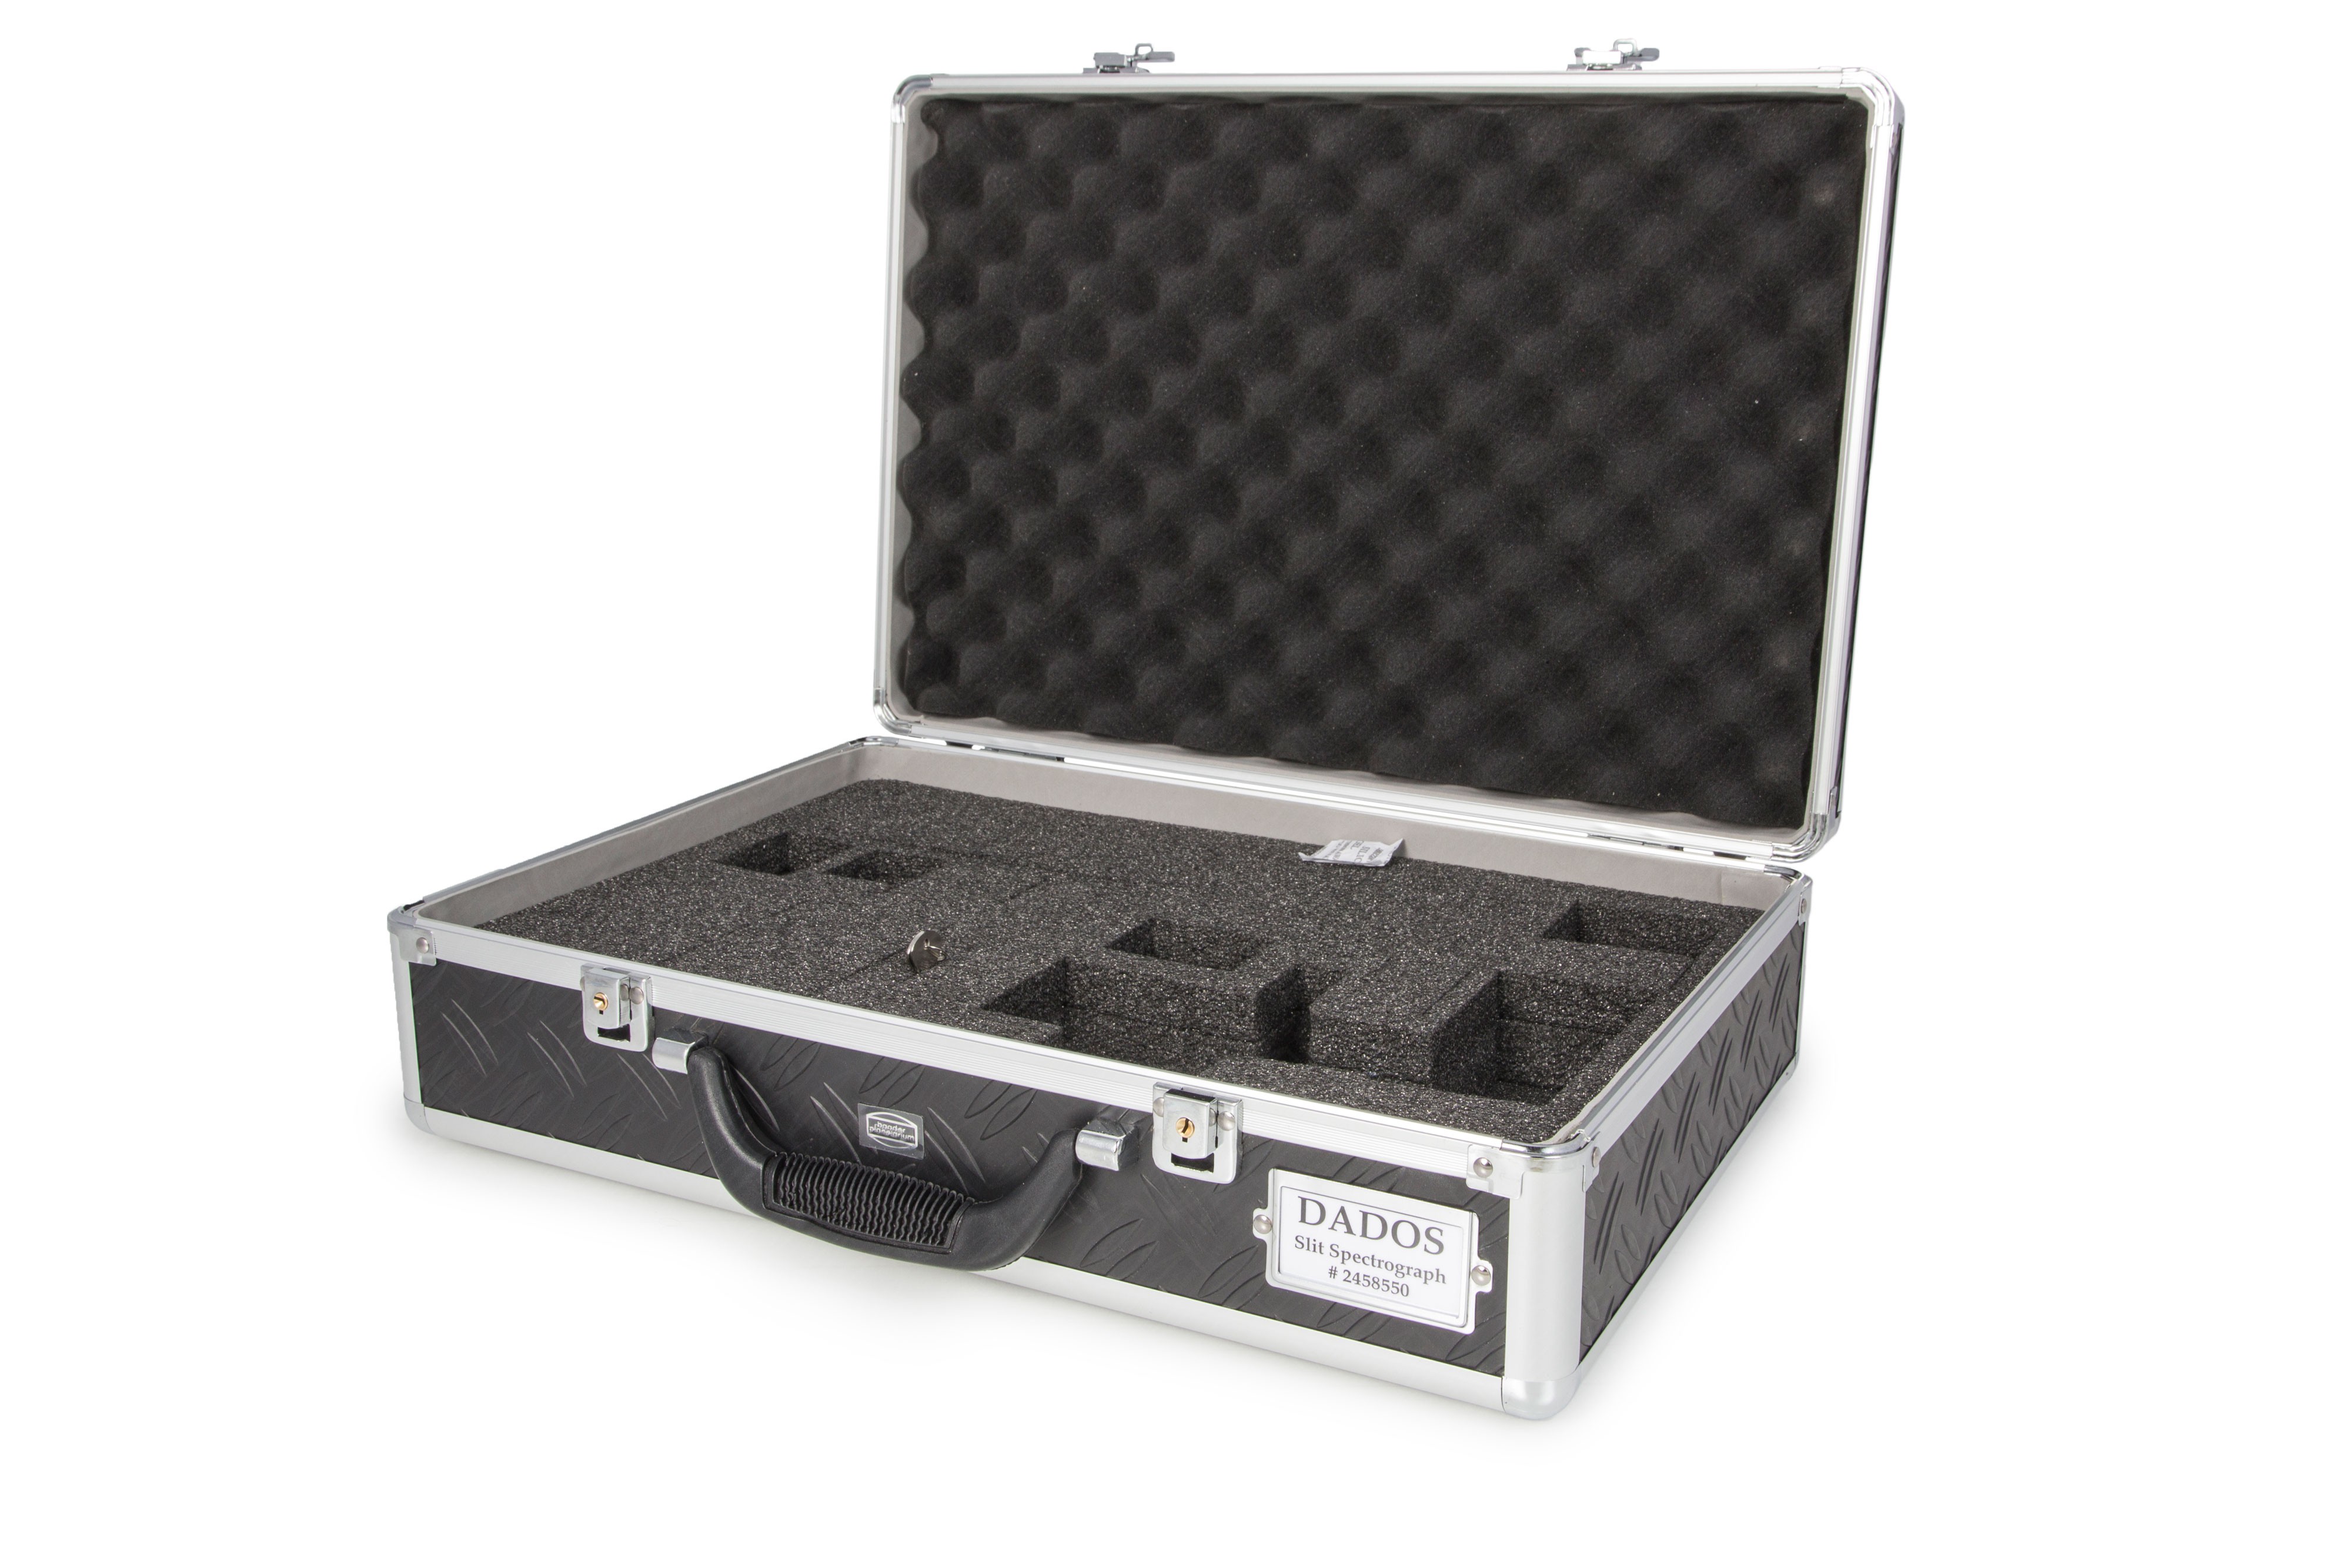 DADOS: Baader Carrying Case for DADOS and accessories